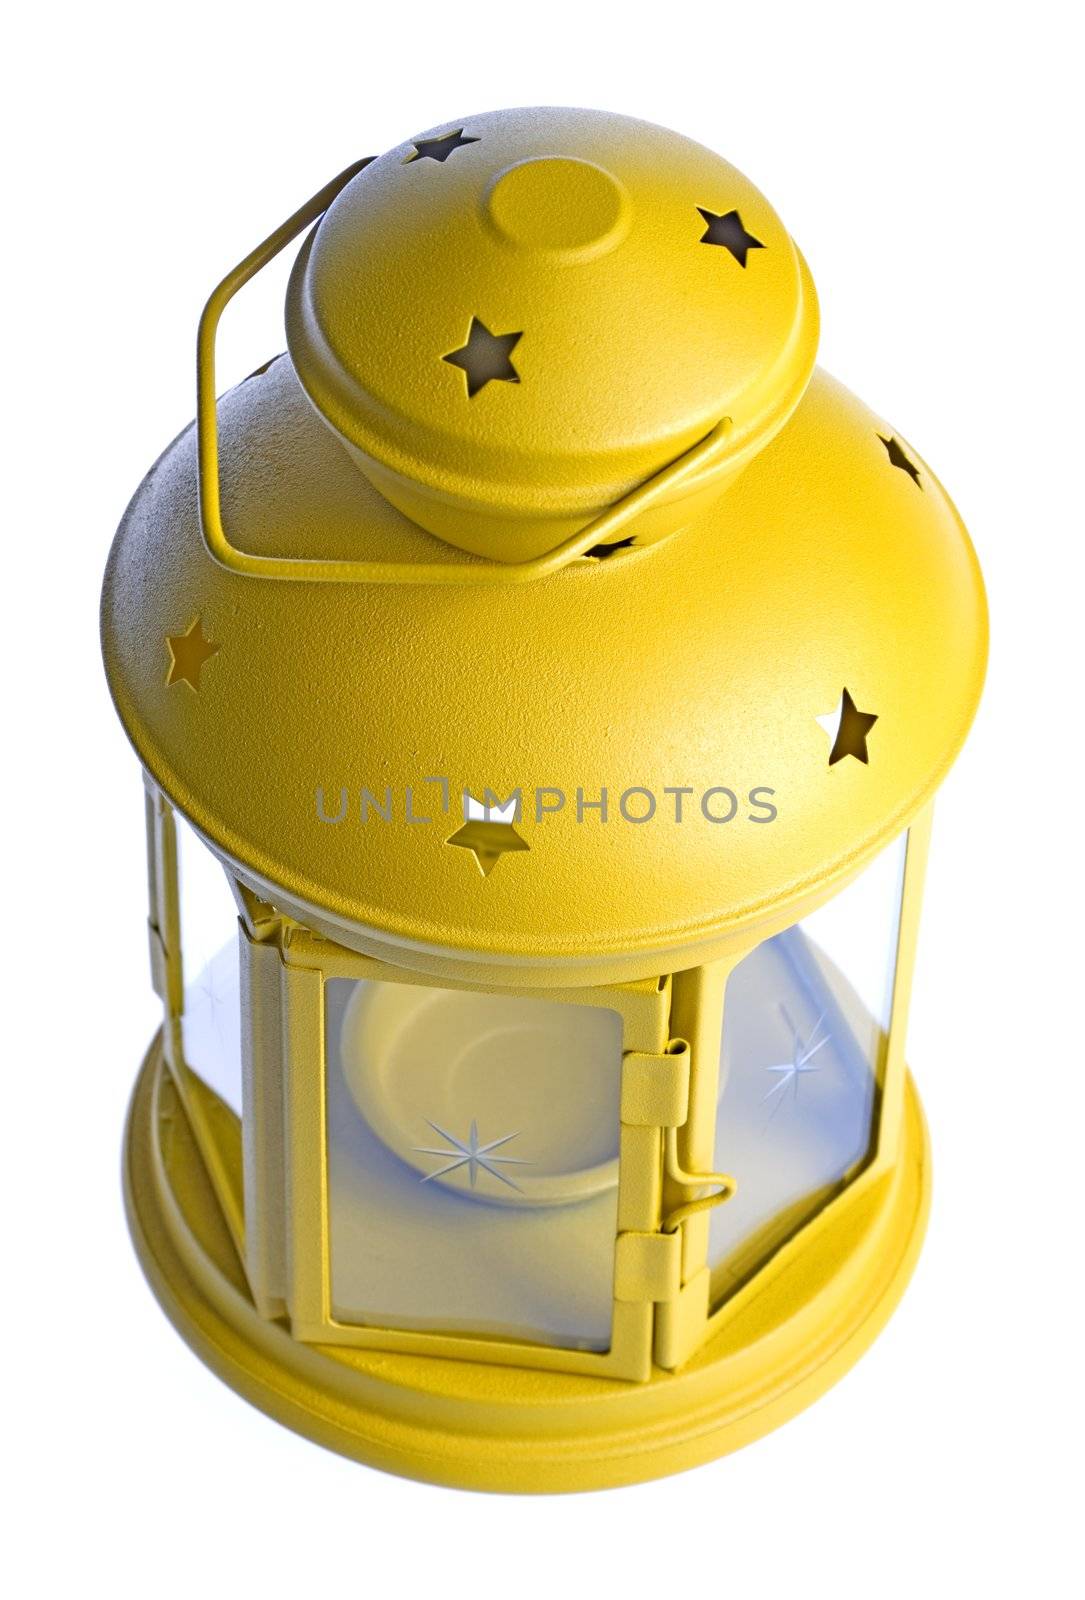 Isolated image of a yellow lantern.